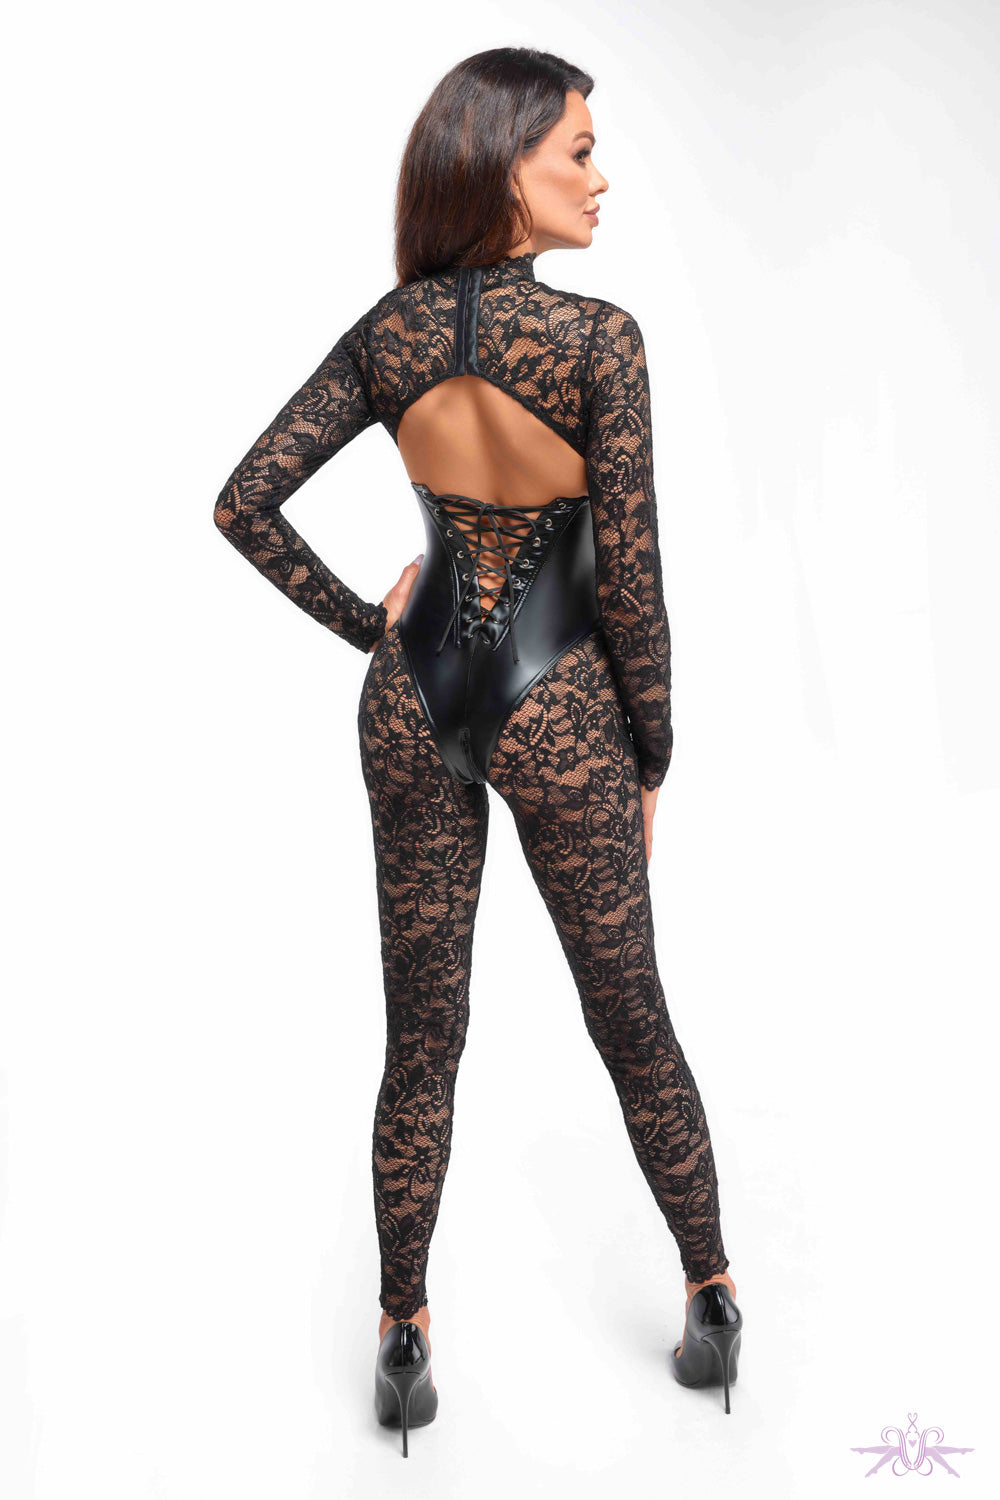 Noir Handmade Enigma Lace Catsuit with Corset